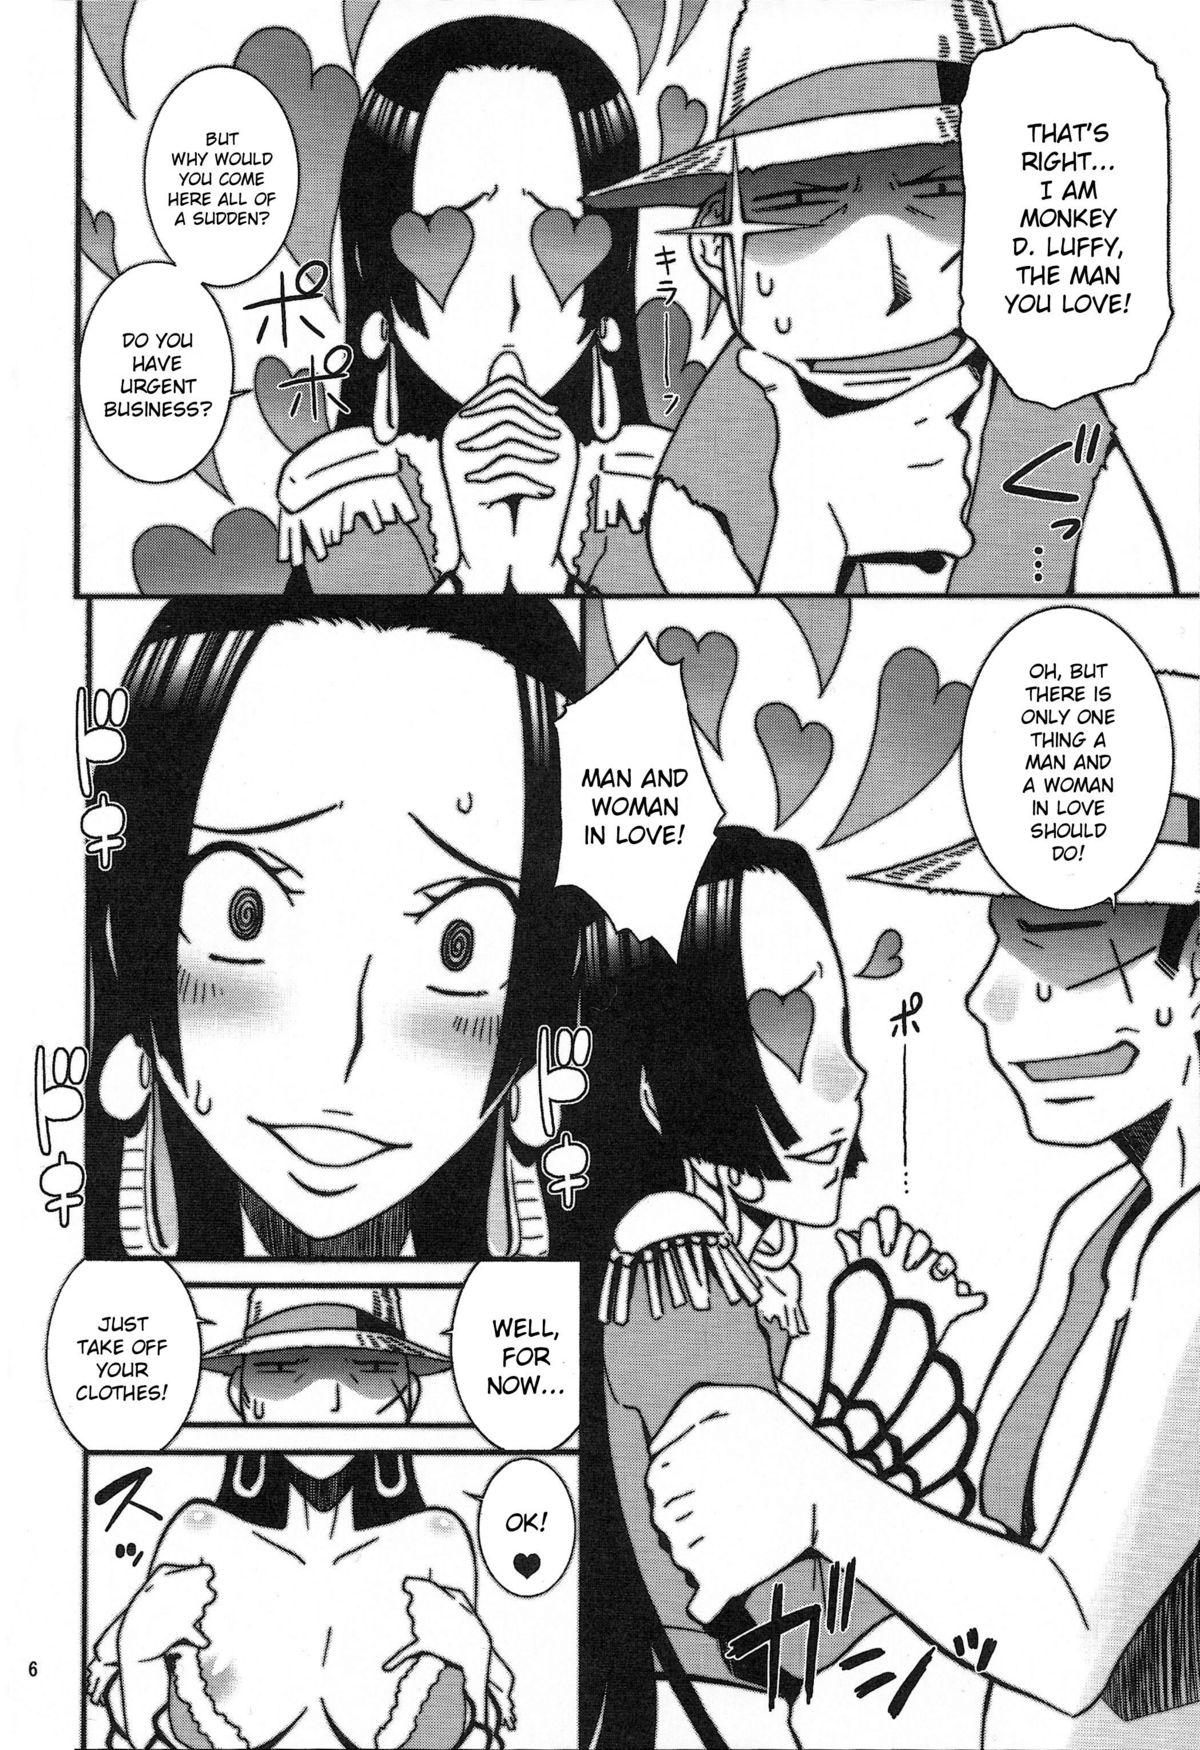 Face NyanNyan Hebihime 2 - One piece Tit - Page 5